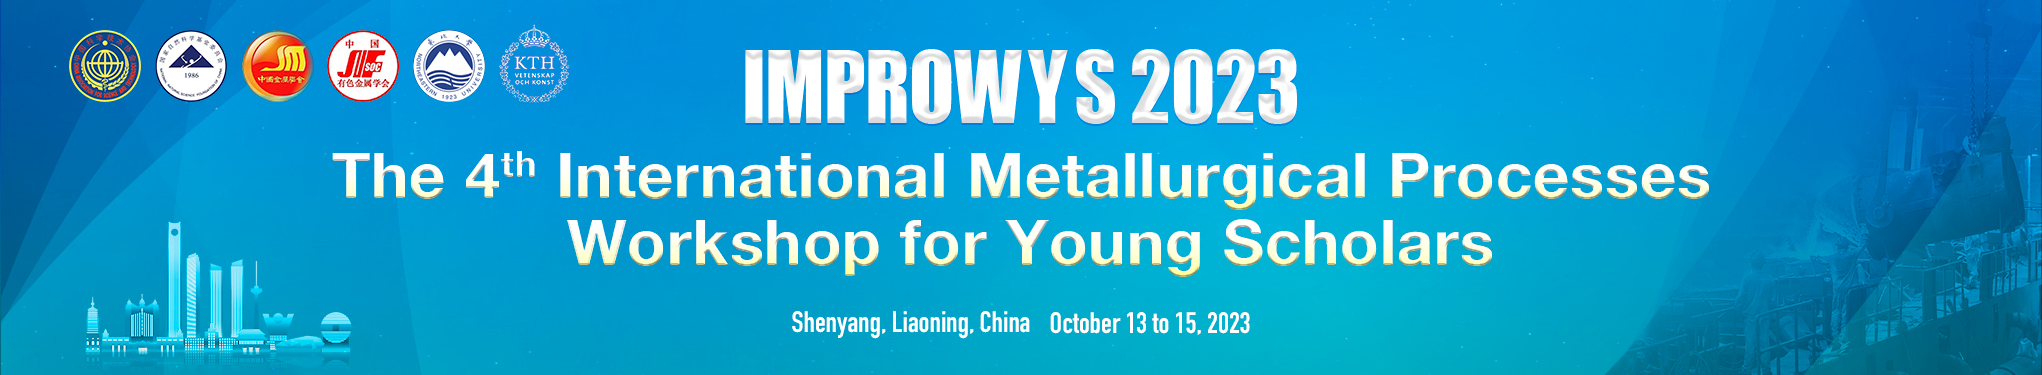 The 4th International Metallurgical Processes Workshop for Young Scholars (IMPROWYS)